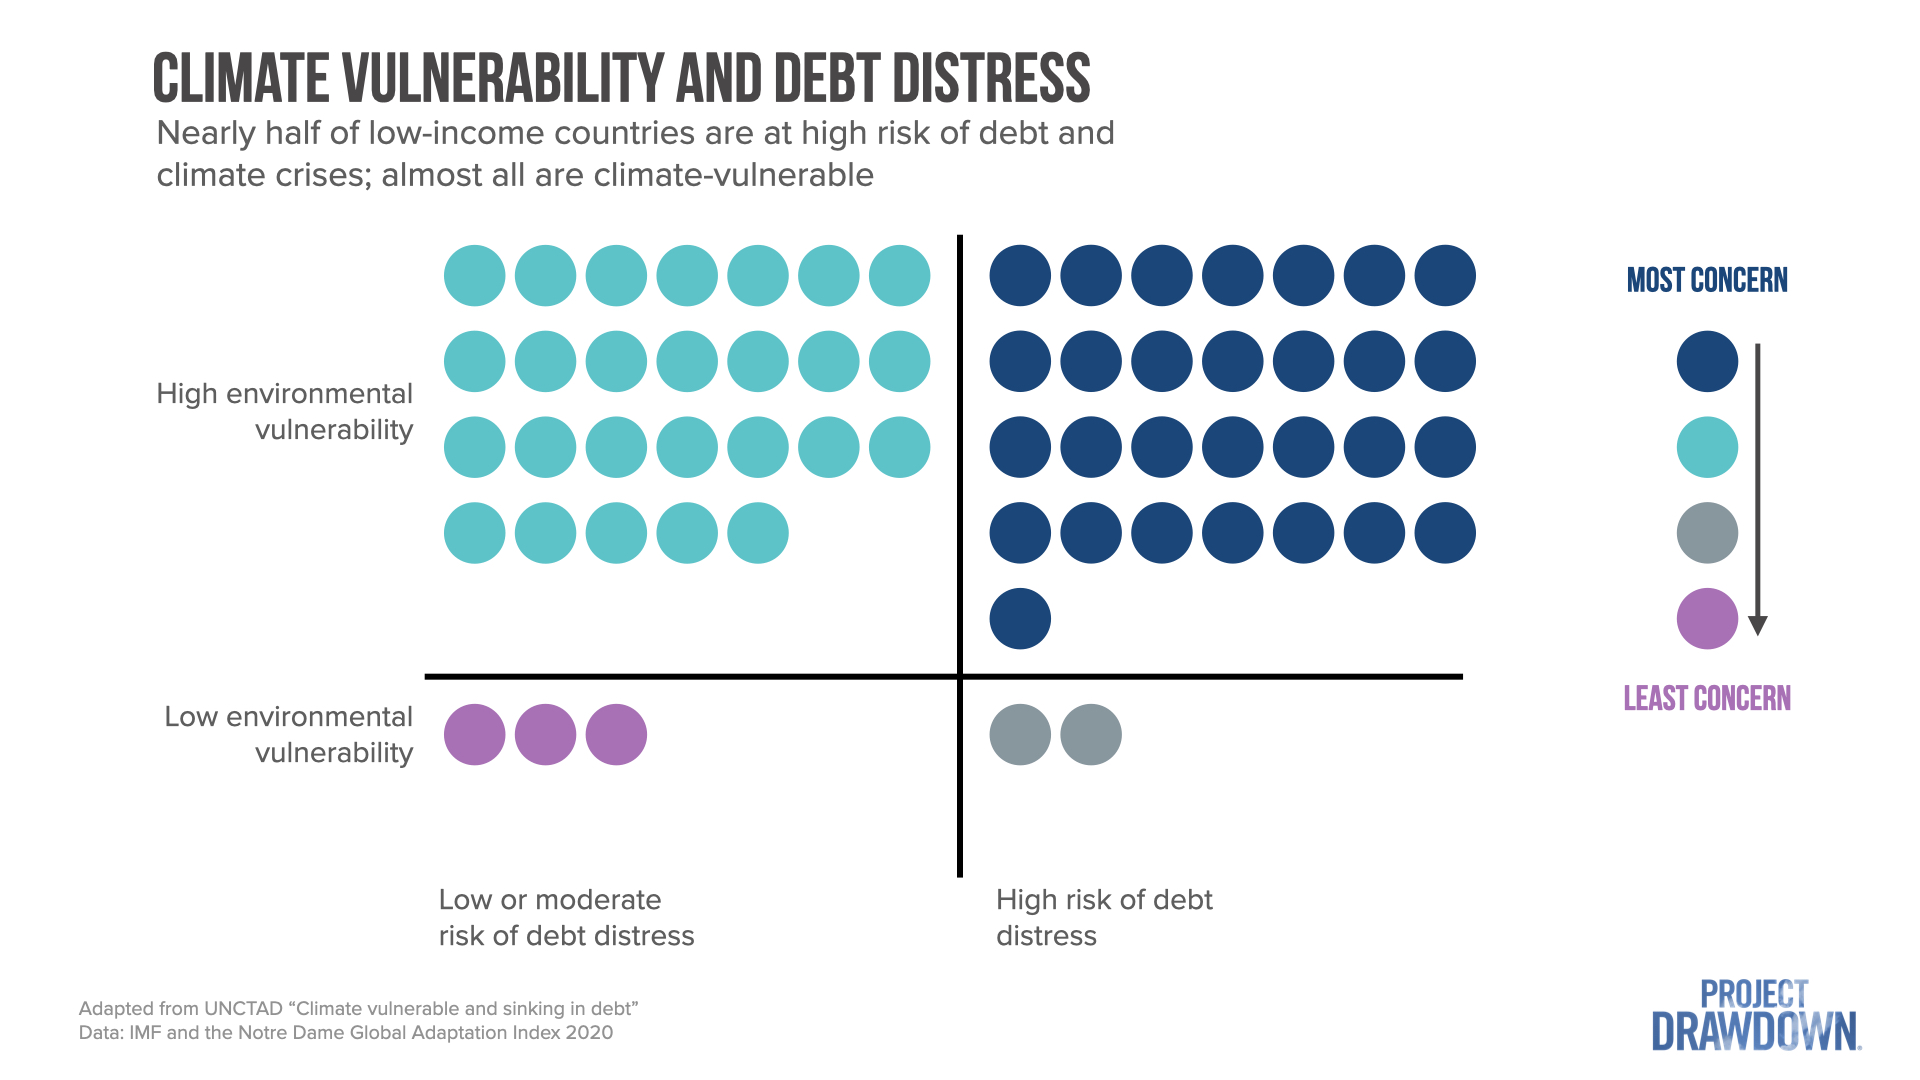 A graphic showing the breakdown of low-income countries susceptible to climate and debt distress